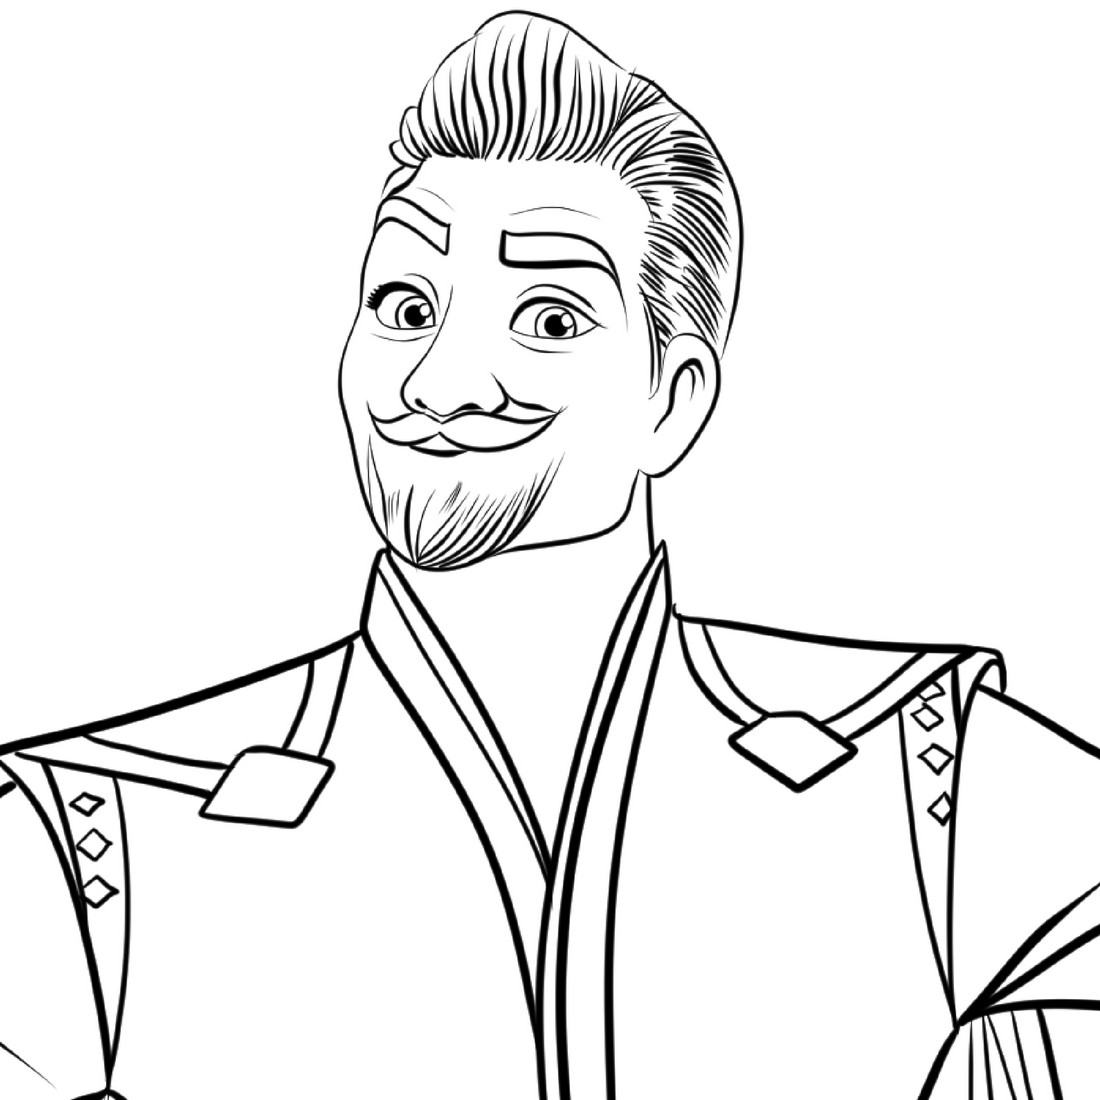 Magnificent King from Wish (Walt Disney Pictures) coloring page to print and color